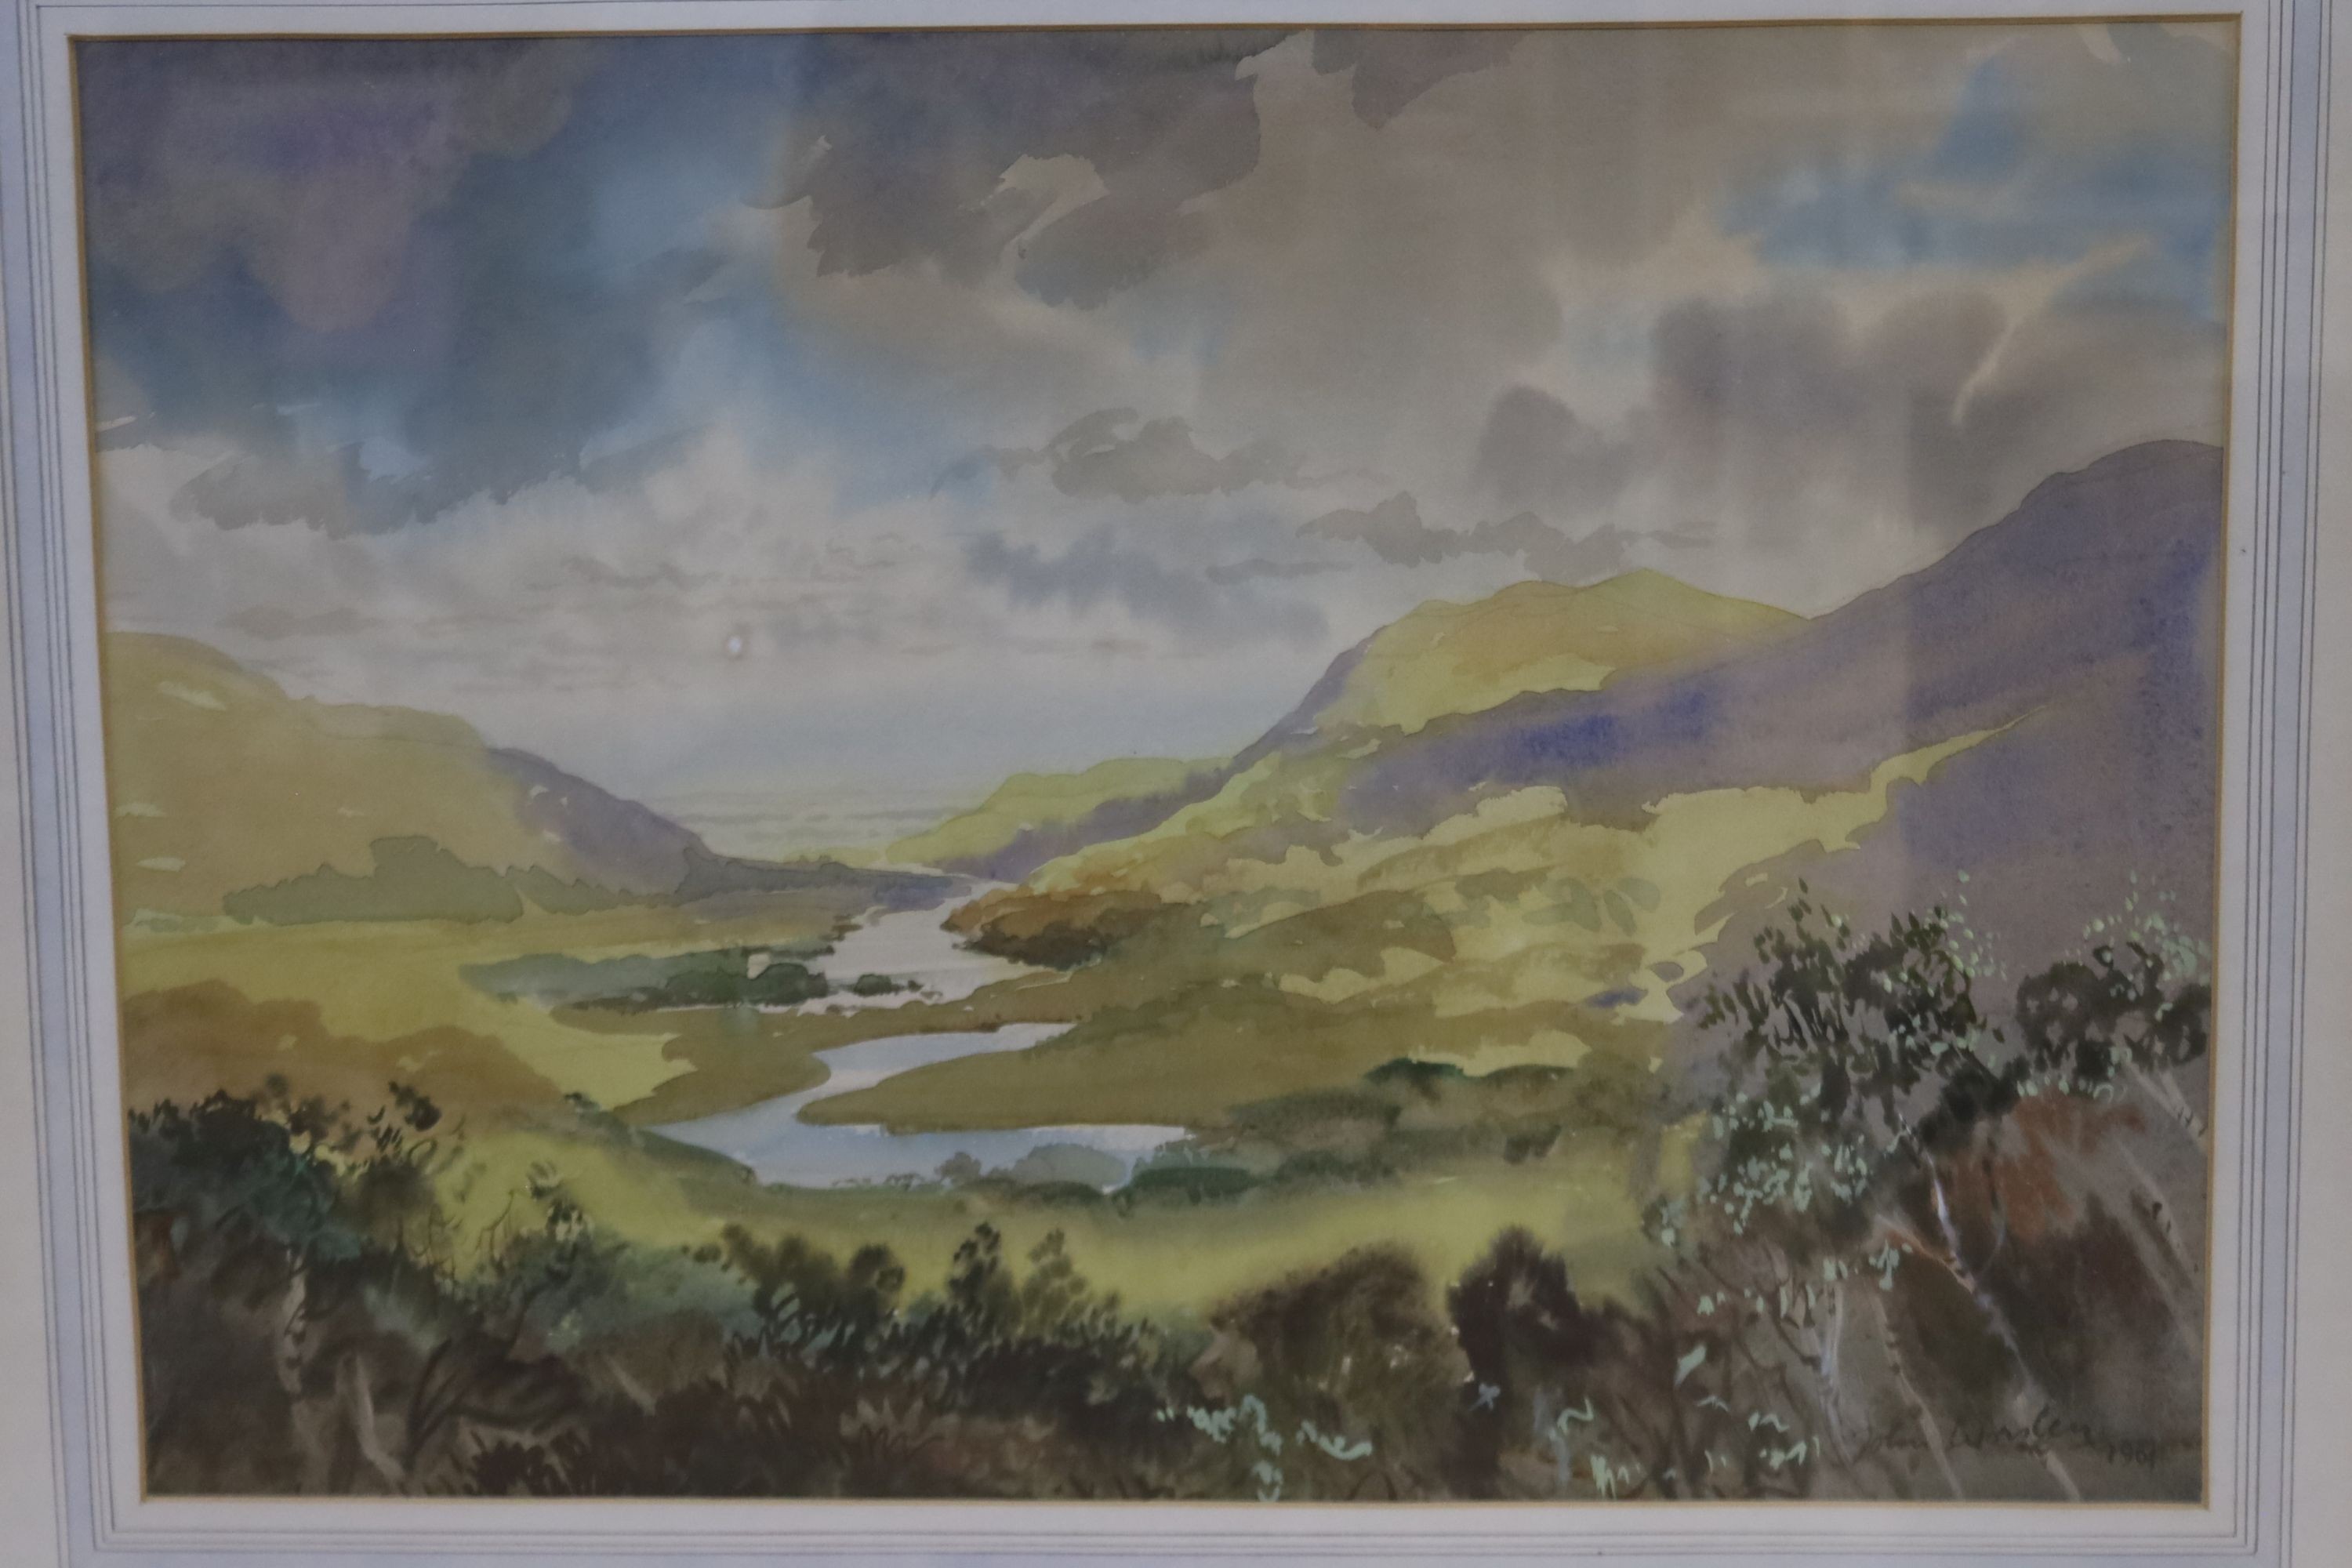 John Worsley (1919-2000), two watercolours, 'Lough Corrib, Galway' and 'Kilarney Lakes', signed, 33 x 50cm and 37 x 52cm